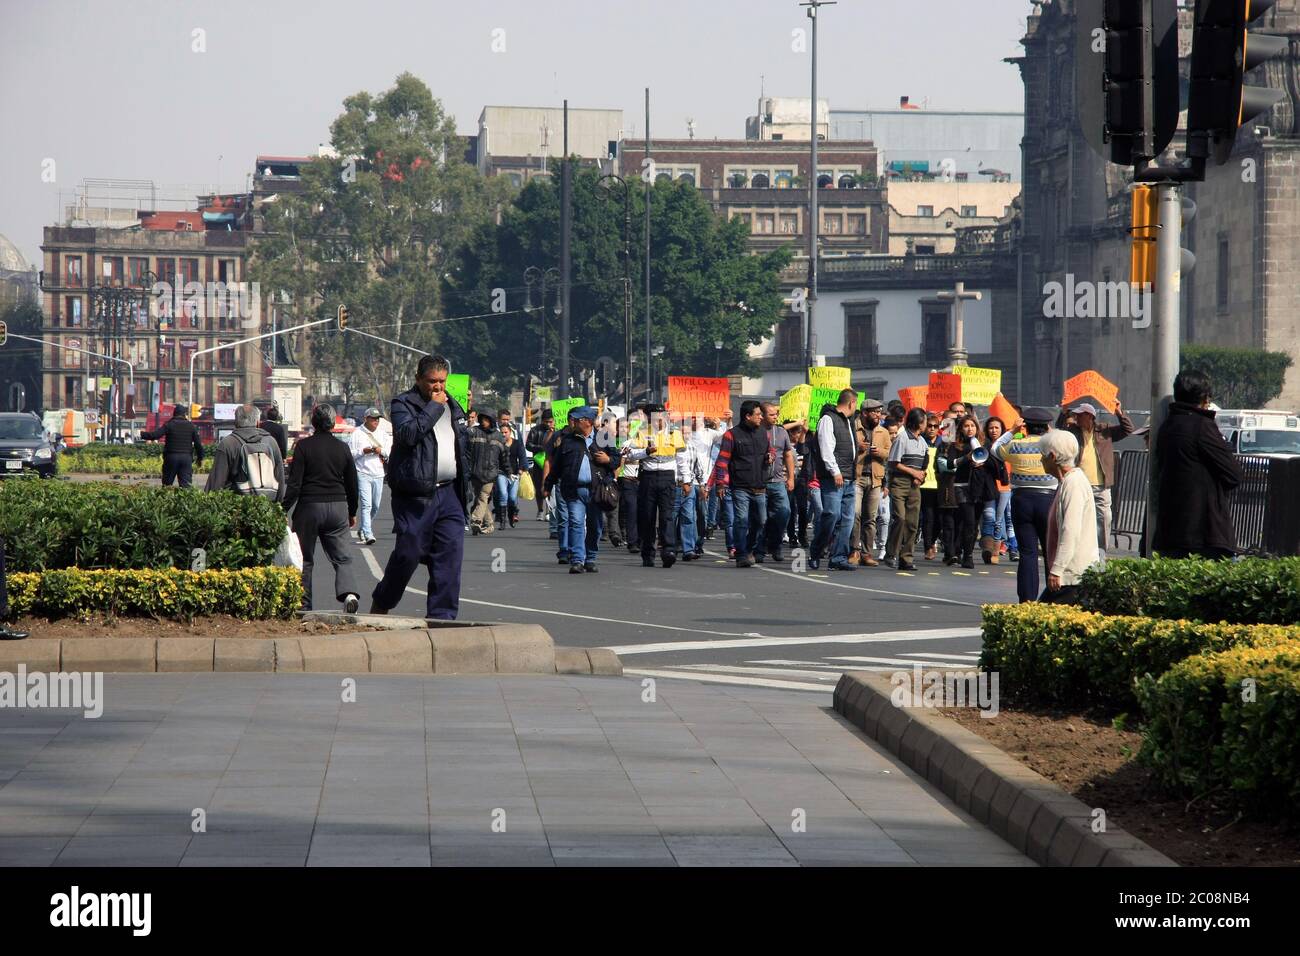 Mexicans protesting peacefully in the central square of Mexico City about jobs and wanting to work - colourful placards Stock Photo